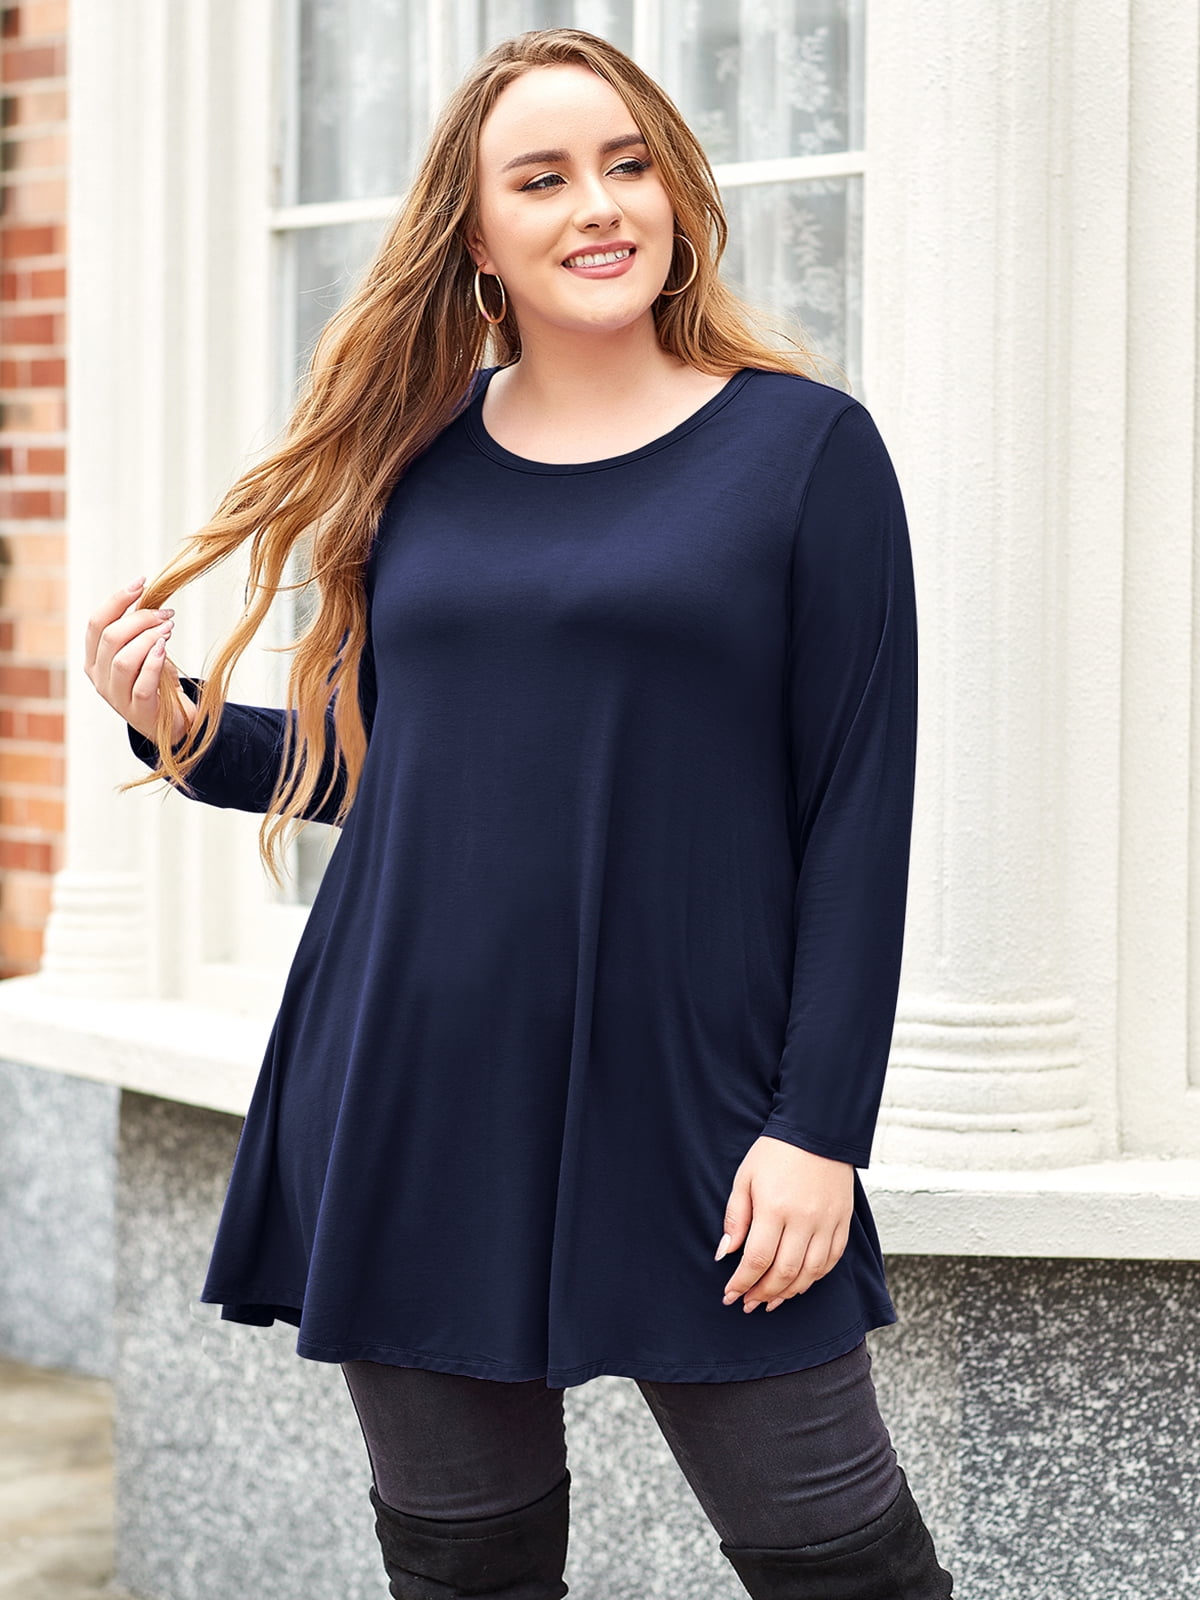 LARACE Plus Size Tunic Tops Long Sleeve Shirts for Women Swing Flowy Loose  Fit Clothes for Leggings Black 2X